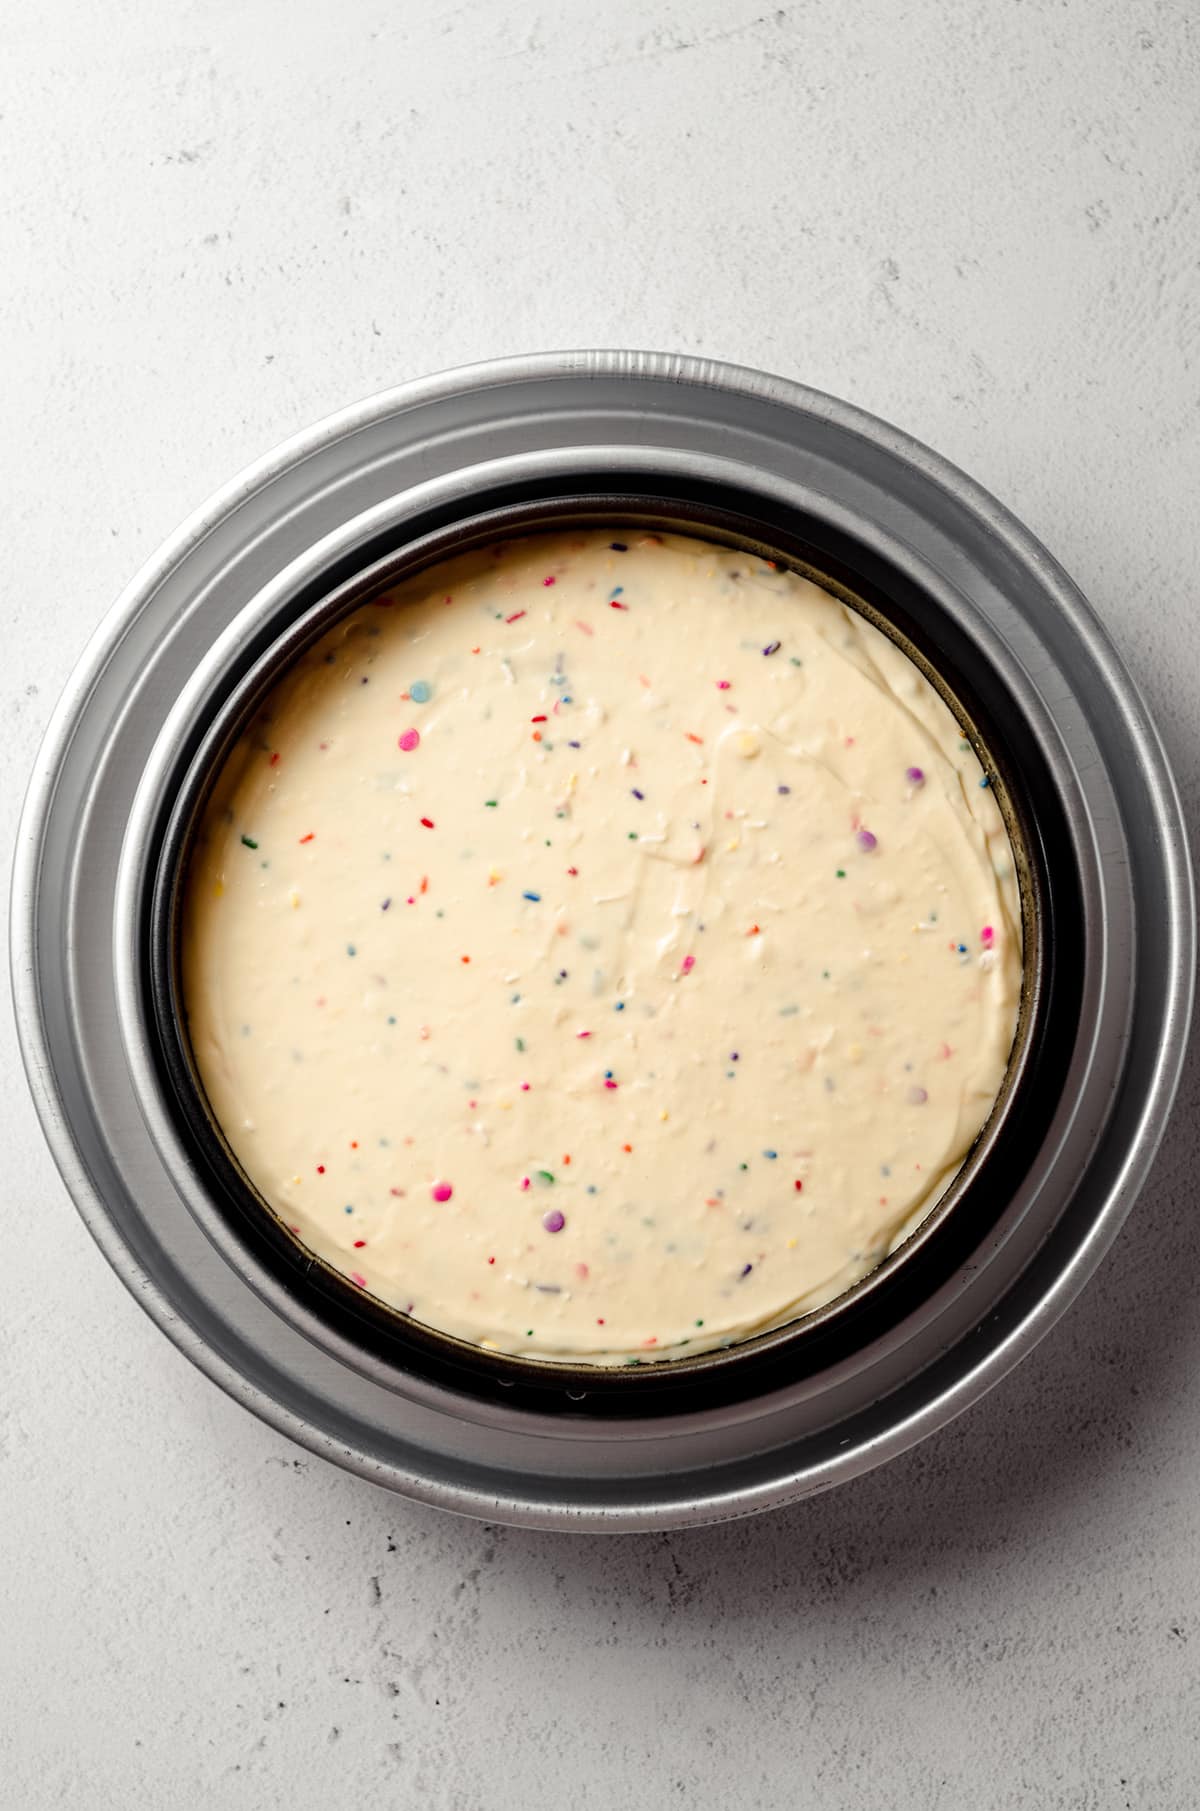 funfetti cheesecake in a springform pan ready to bake